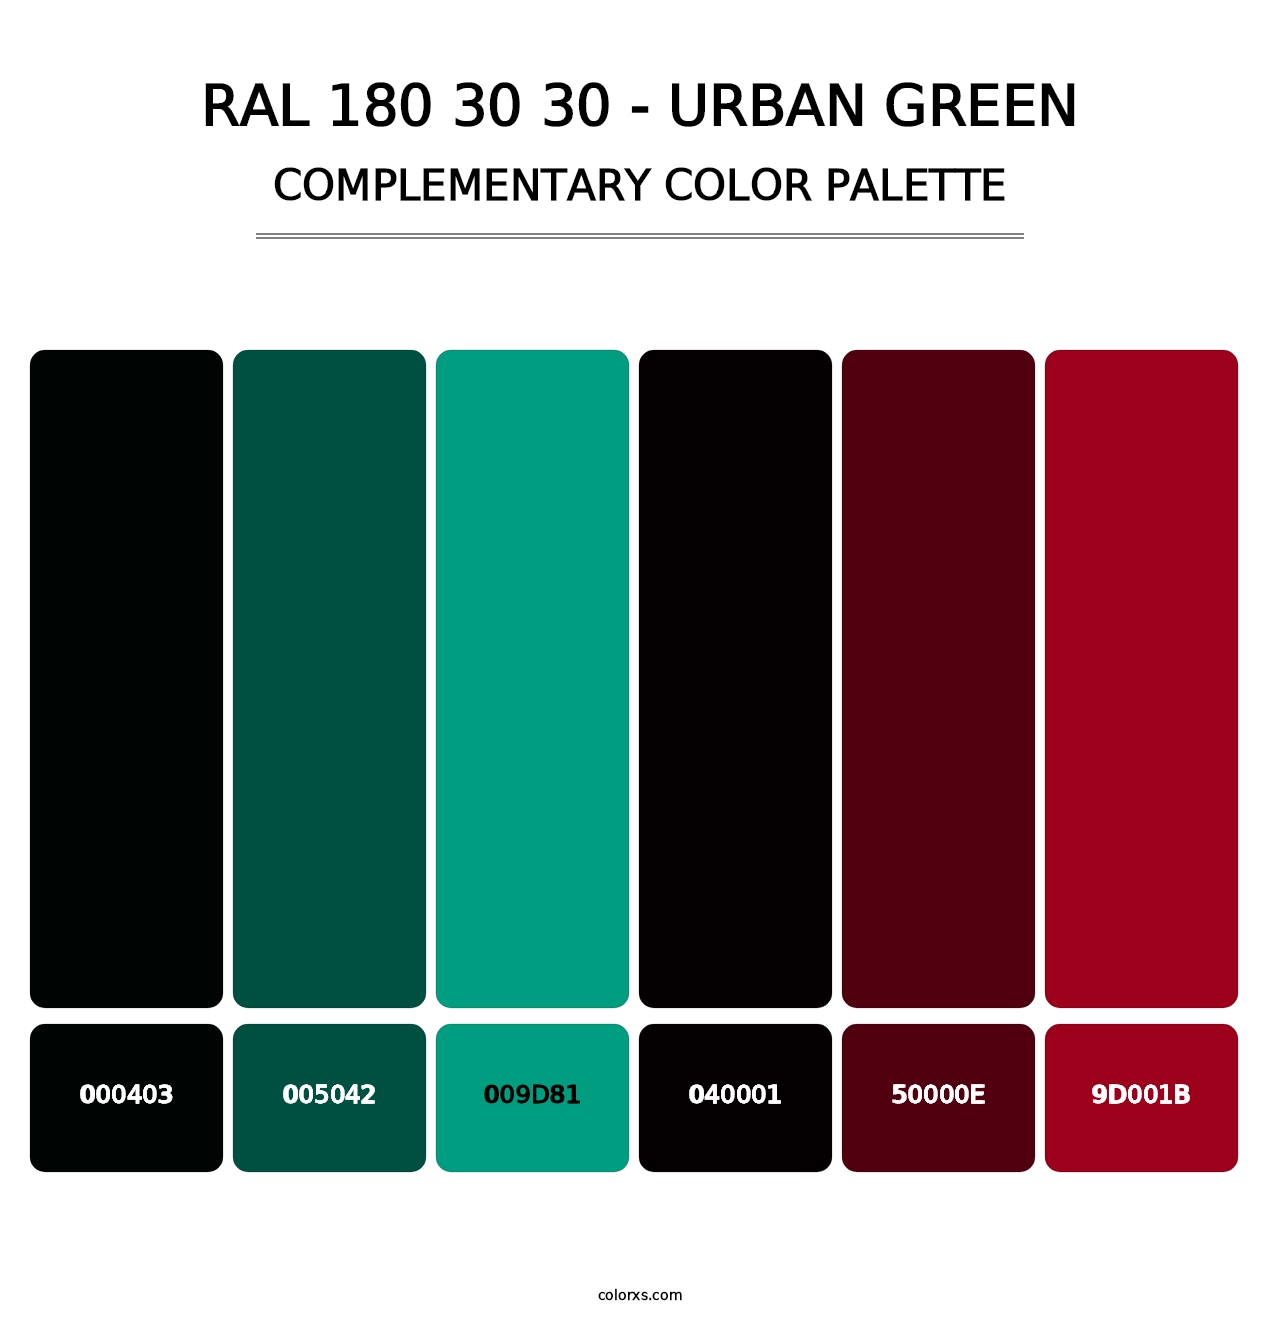 RAL 180 30 30 - Urban Green - Complementary Color Palette